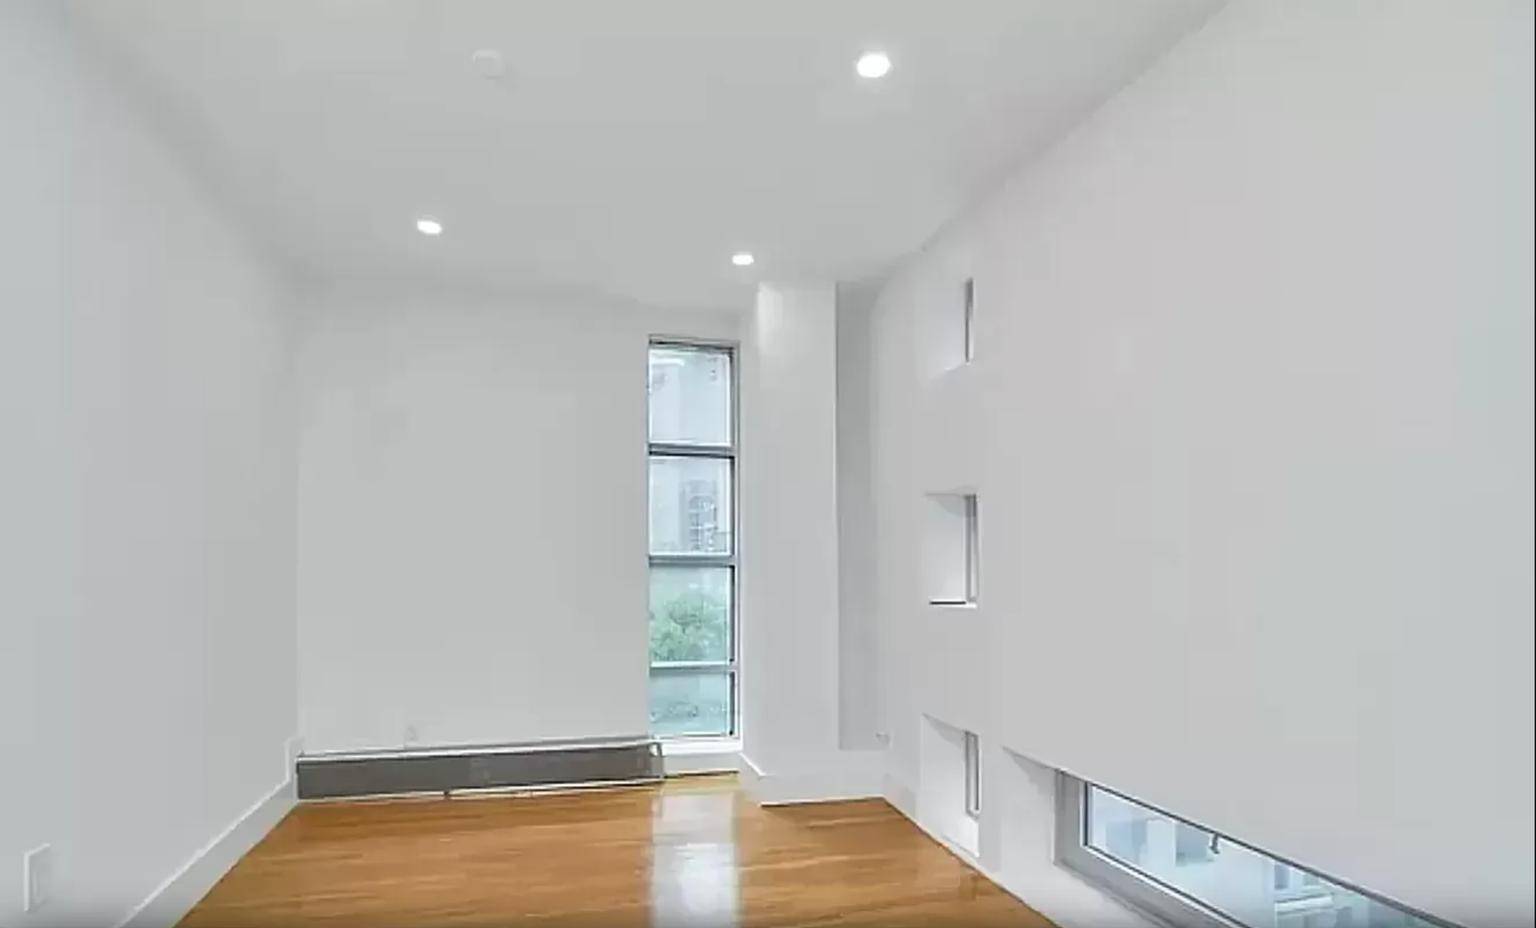 INQUIRE FOR A VIDEOAVAILABLE STARTING JUNE 5Live in this beautiful 3 bedroom 1 bathroom apartment in the heart of Kips Bay in an ELEVATOR building off Lexington Avenue !